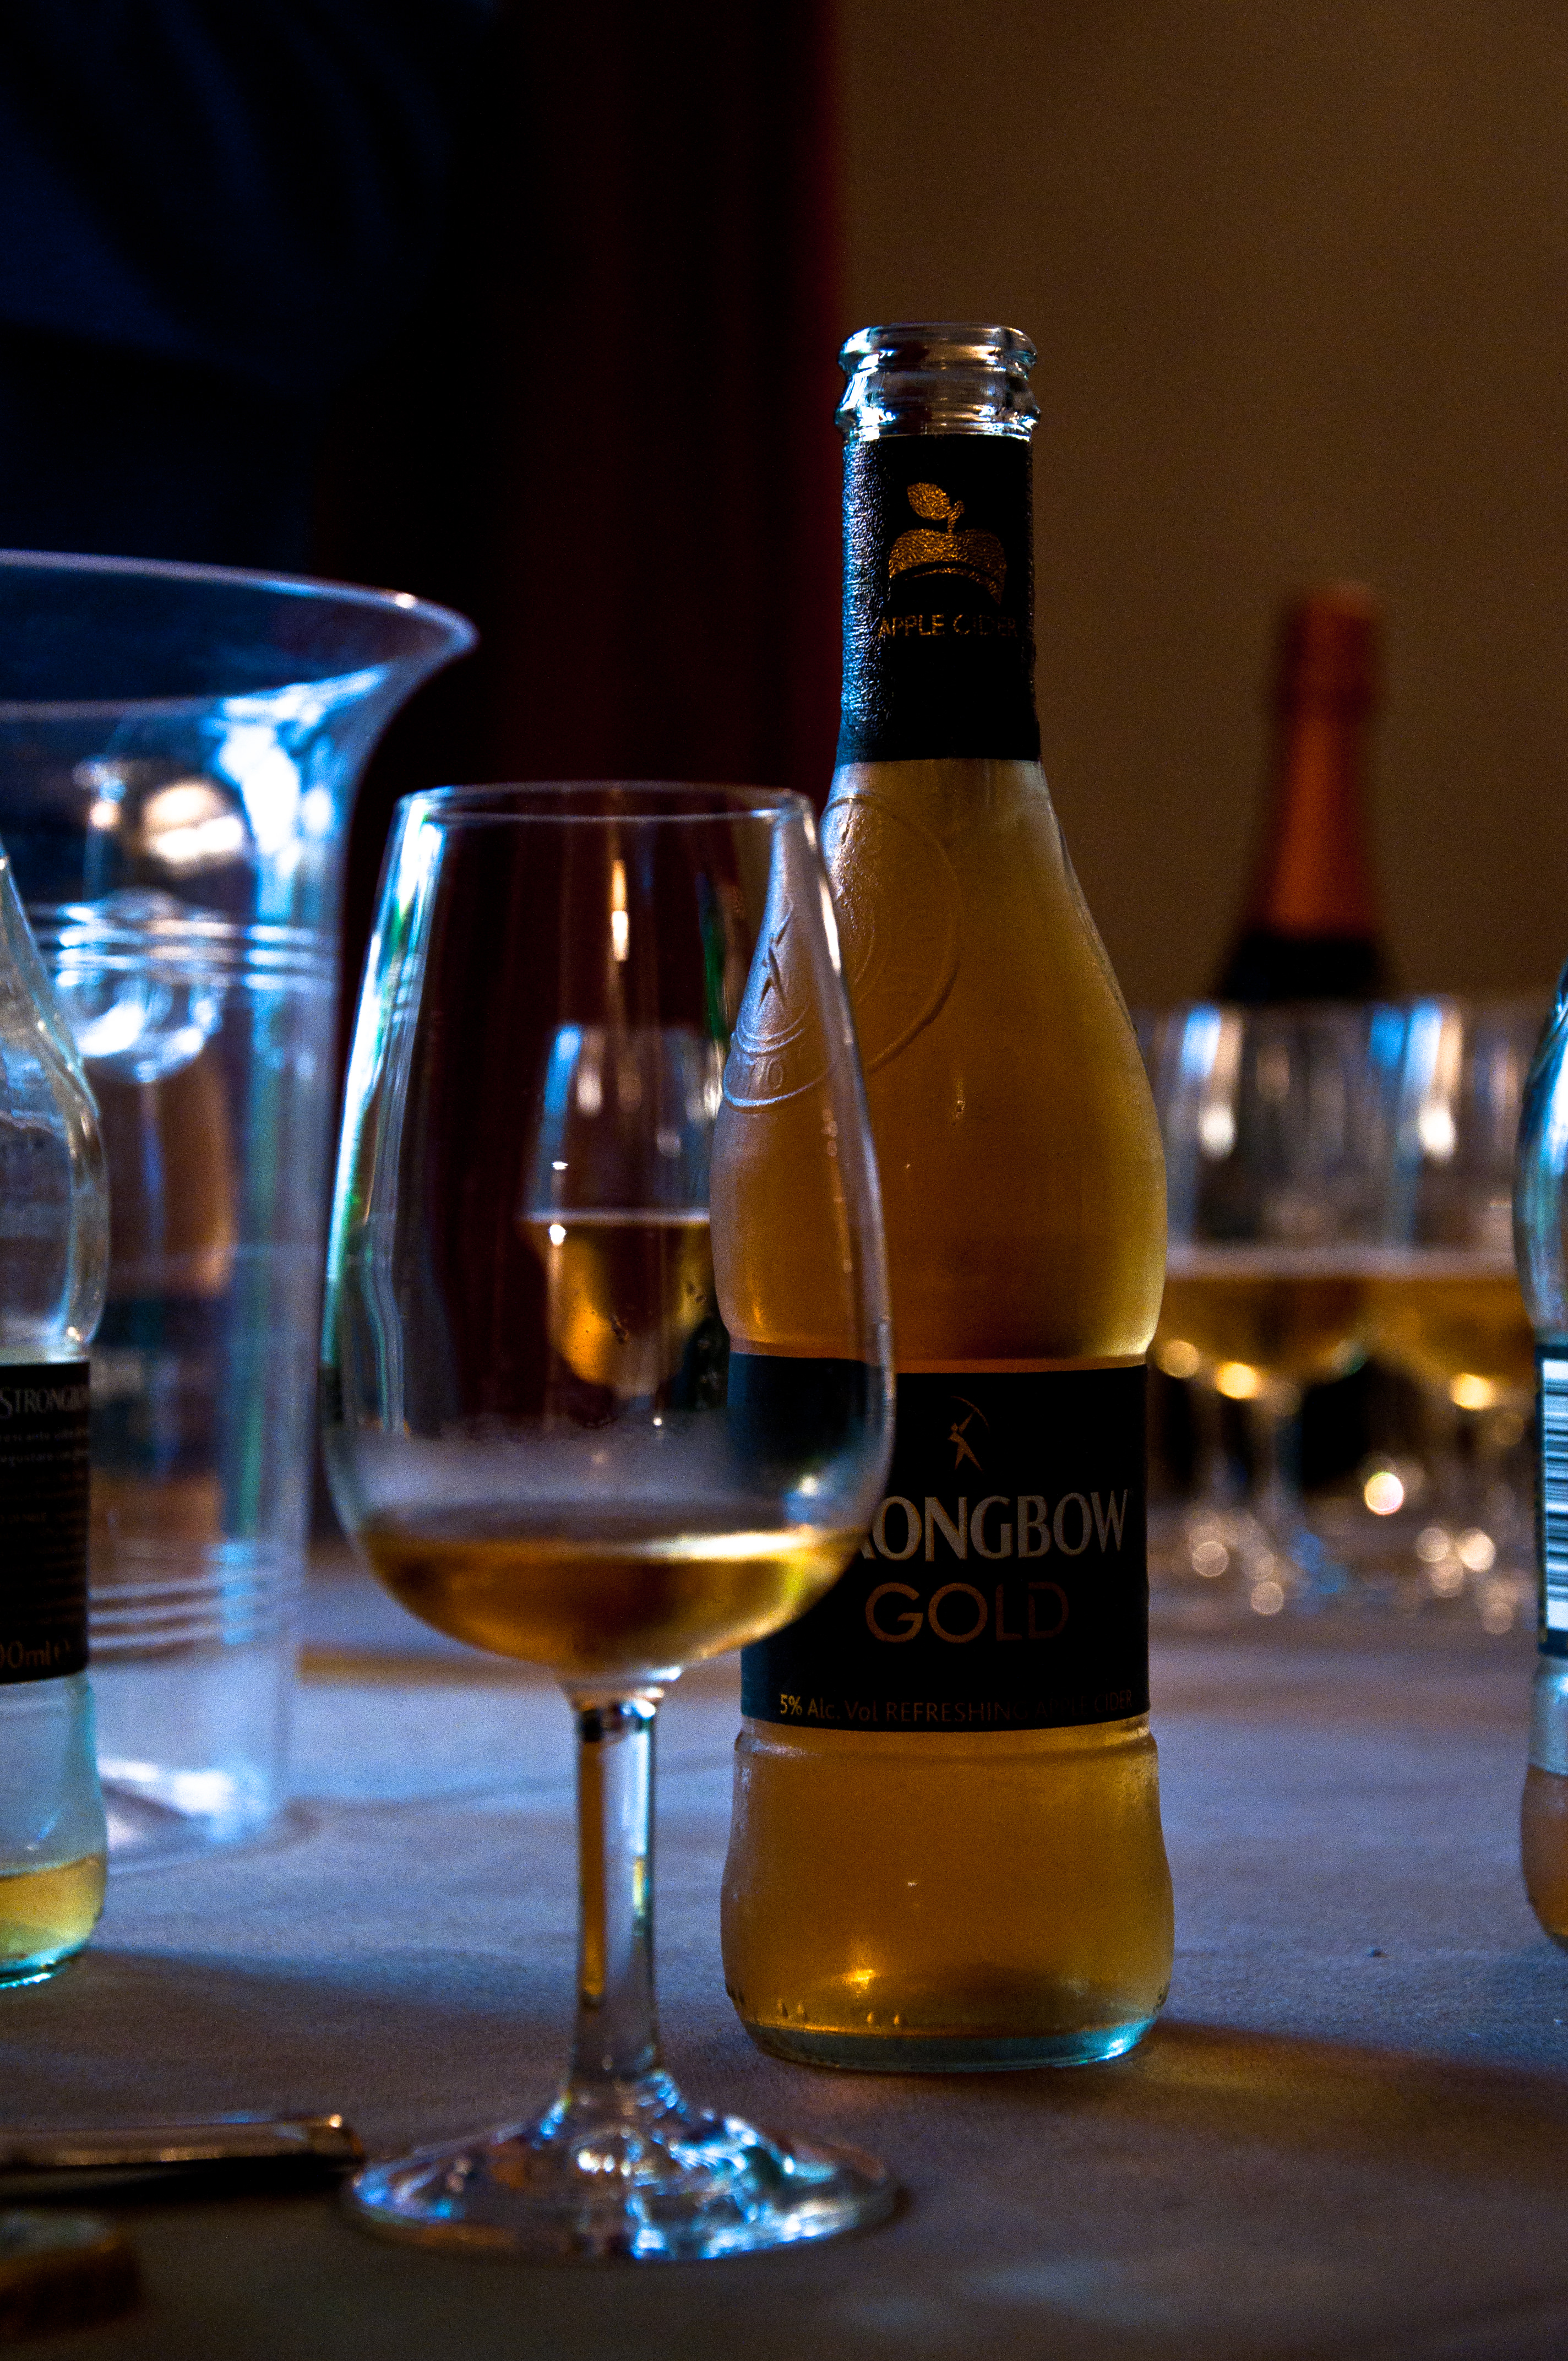 Aubel - Strongbowgold